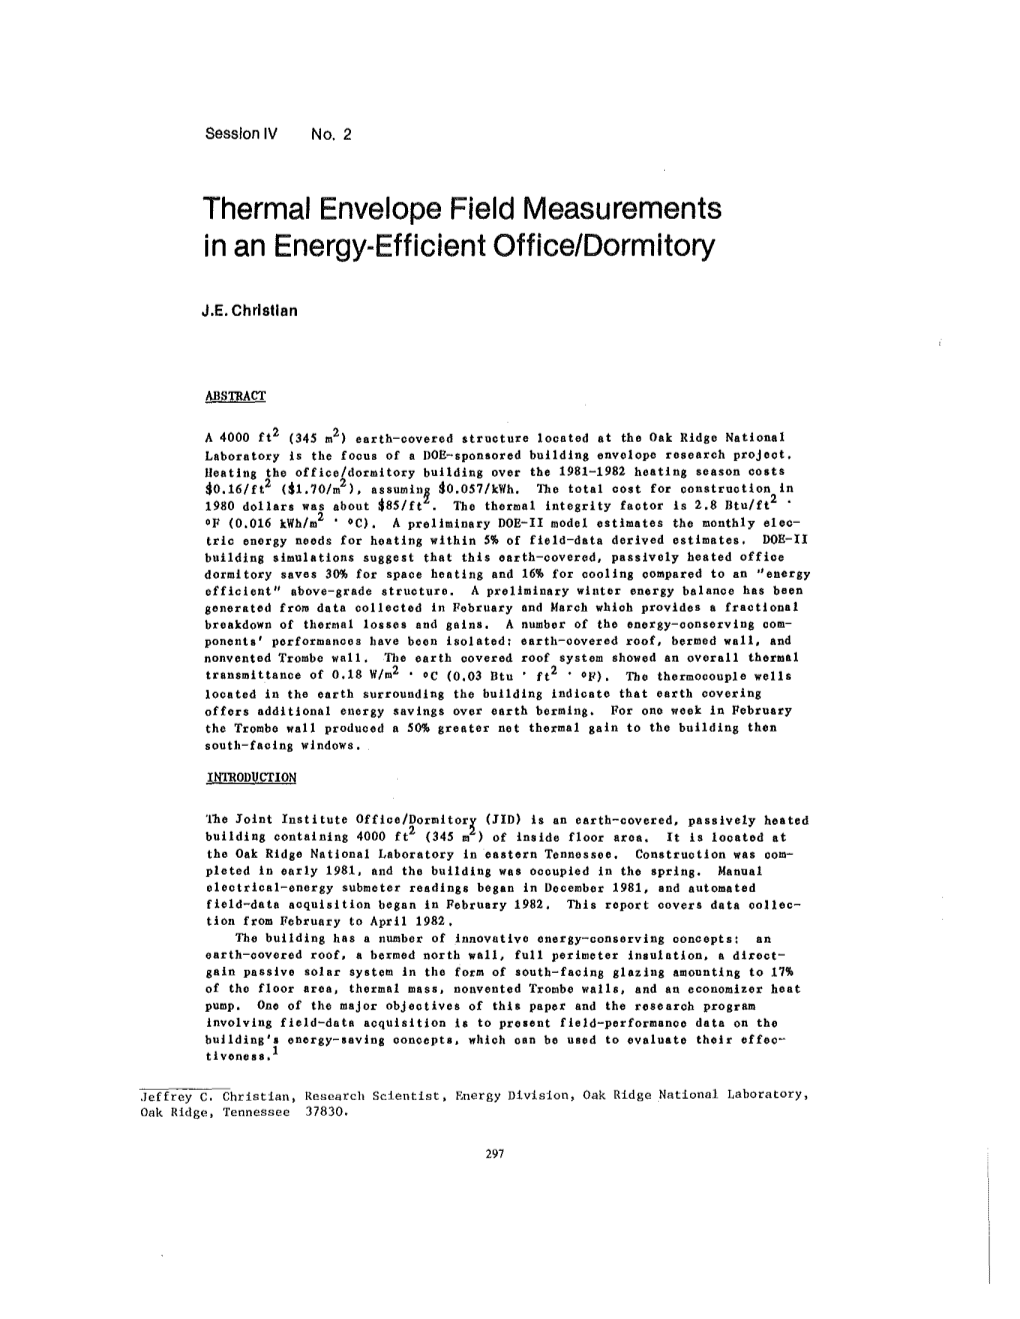 Thermal Envelope Field Measurements in an Energy-Efficient Office/Dormitory